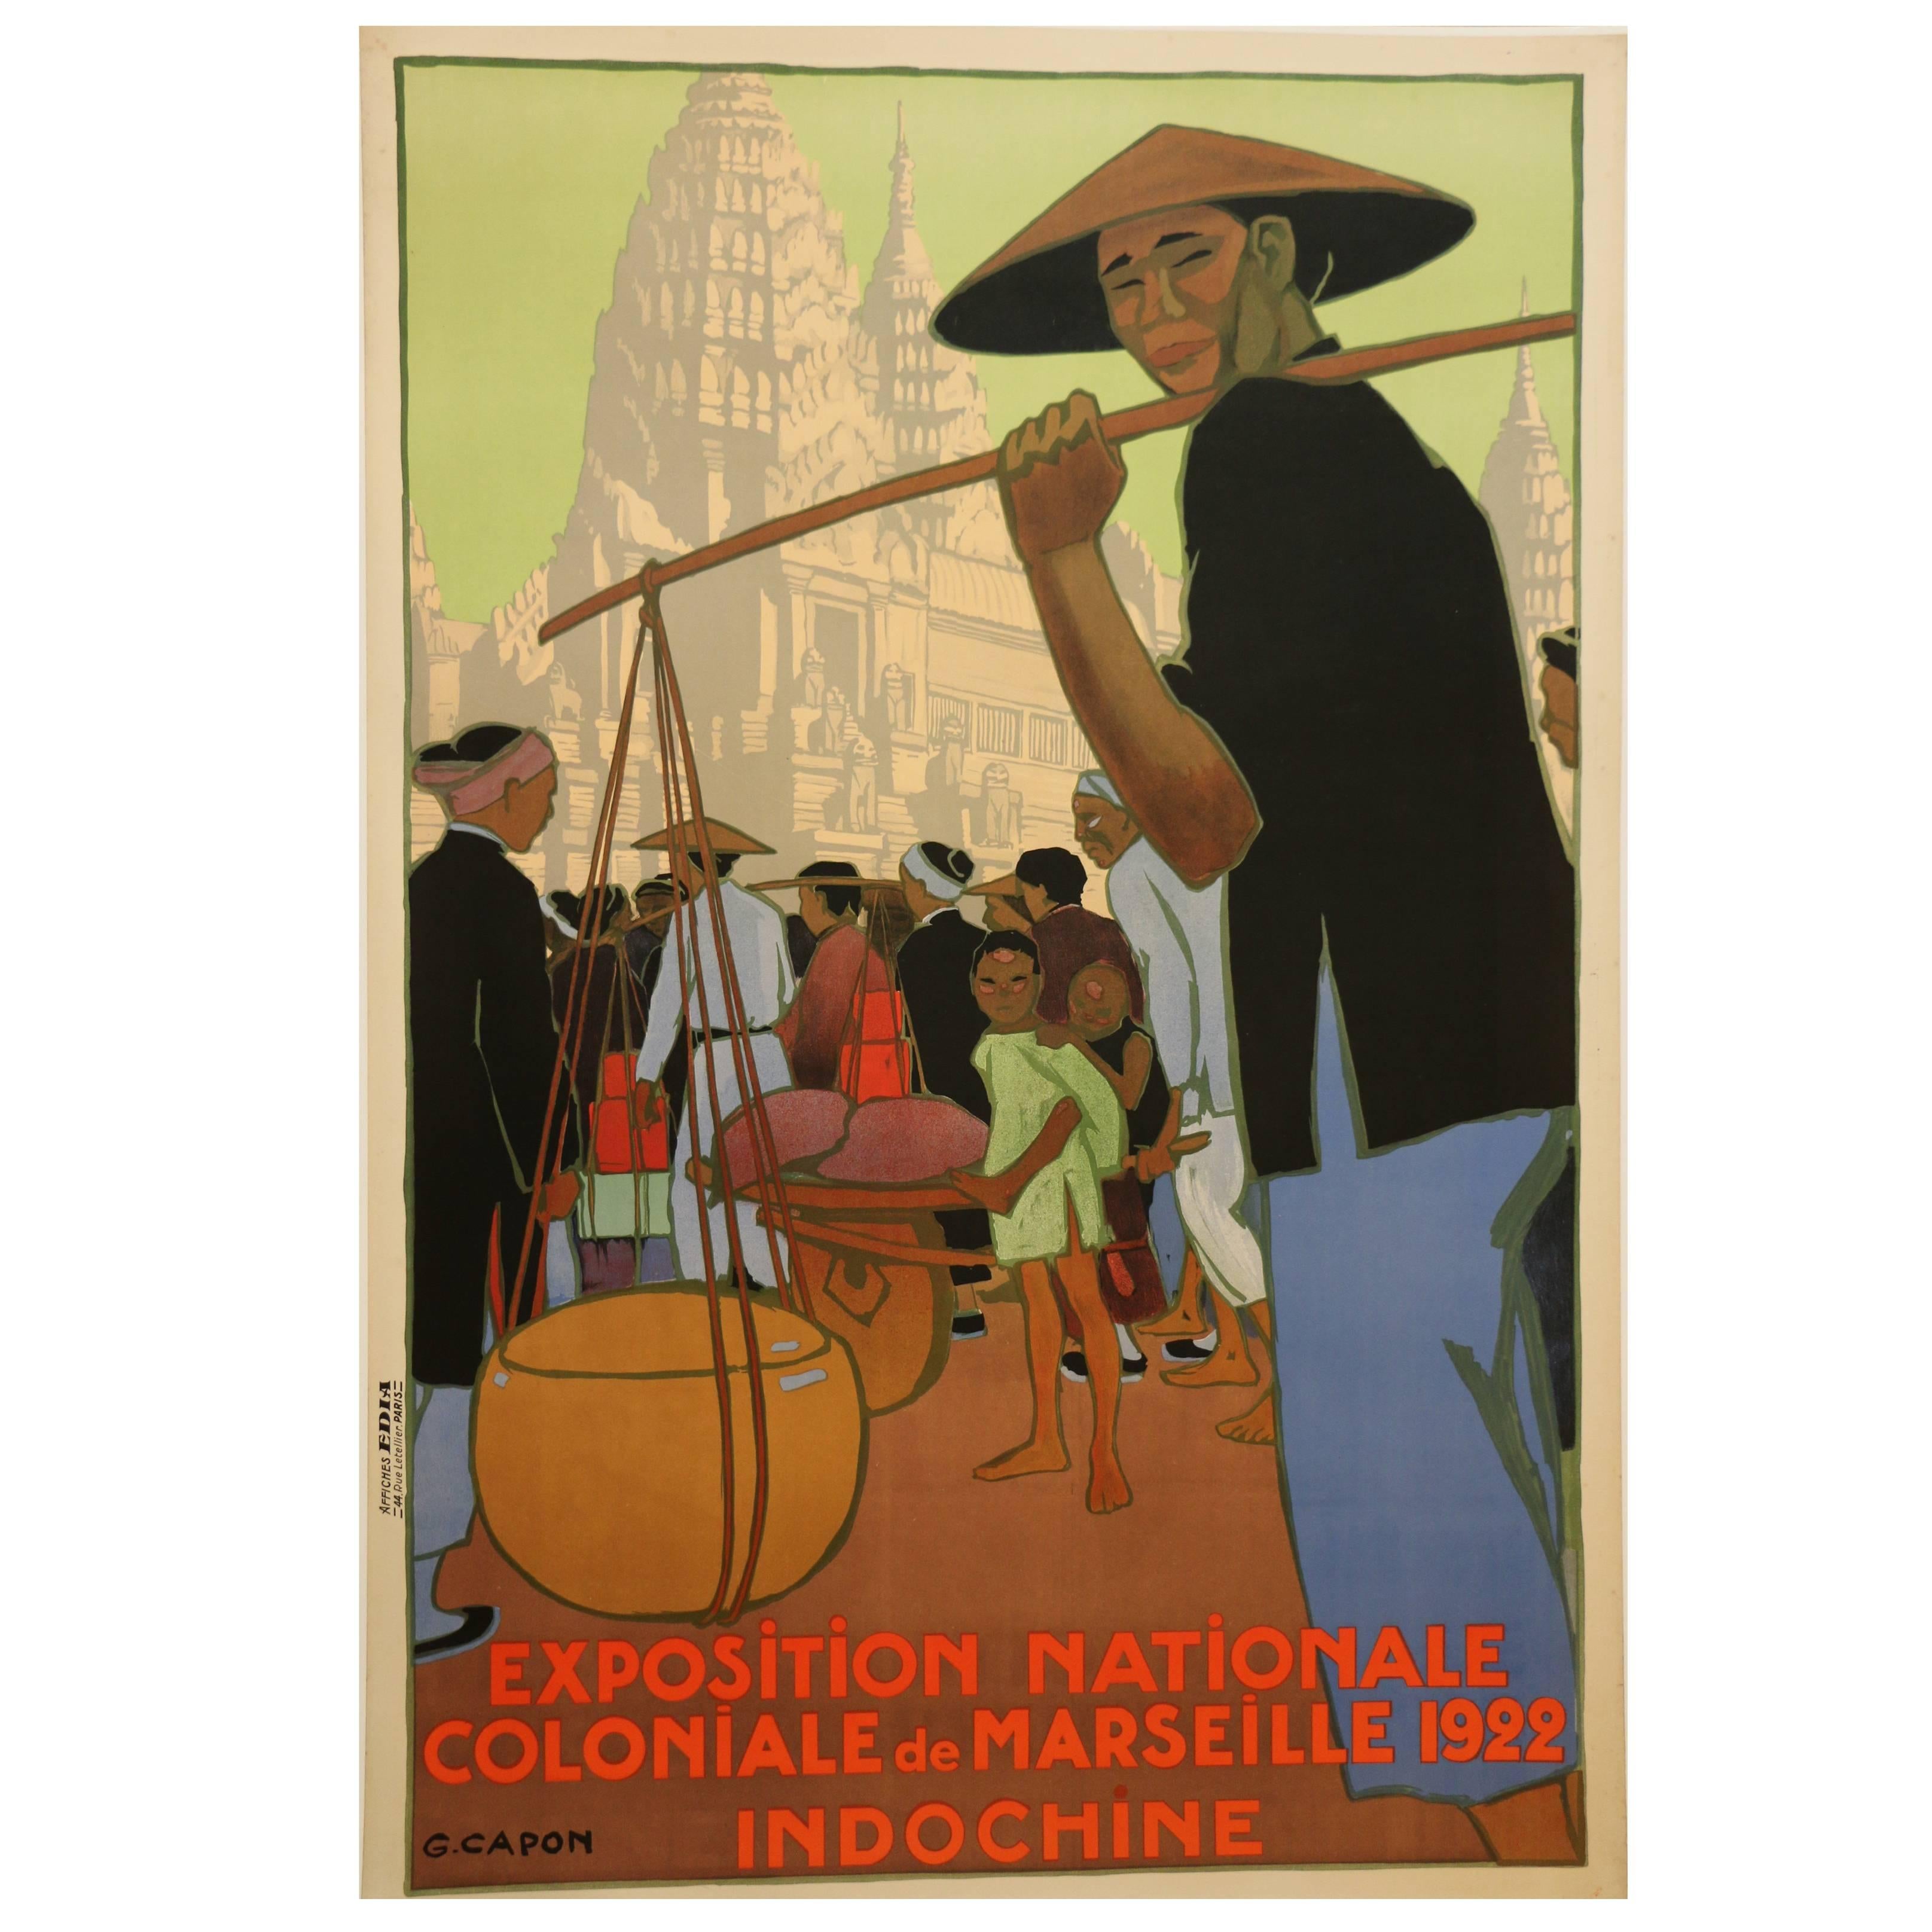 Poster for the 1922 Marseille Colonial Show by Georges Capon, Art Deco, France